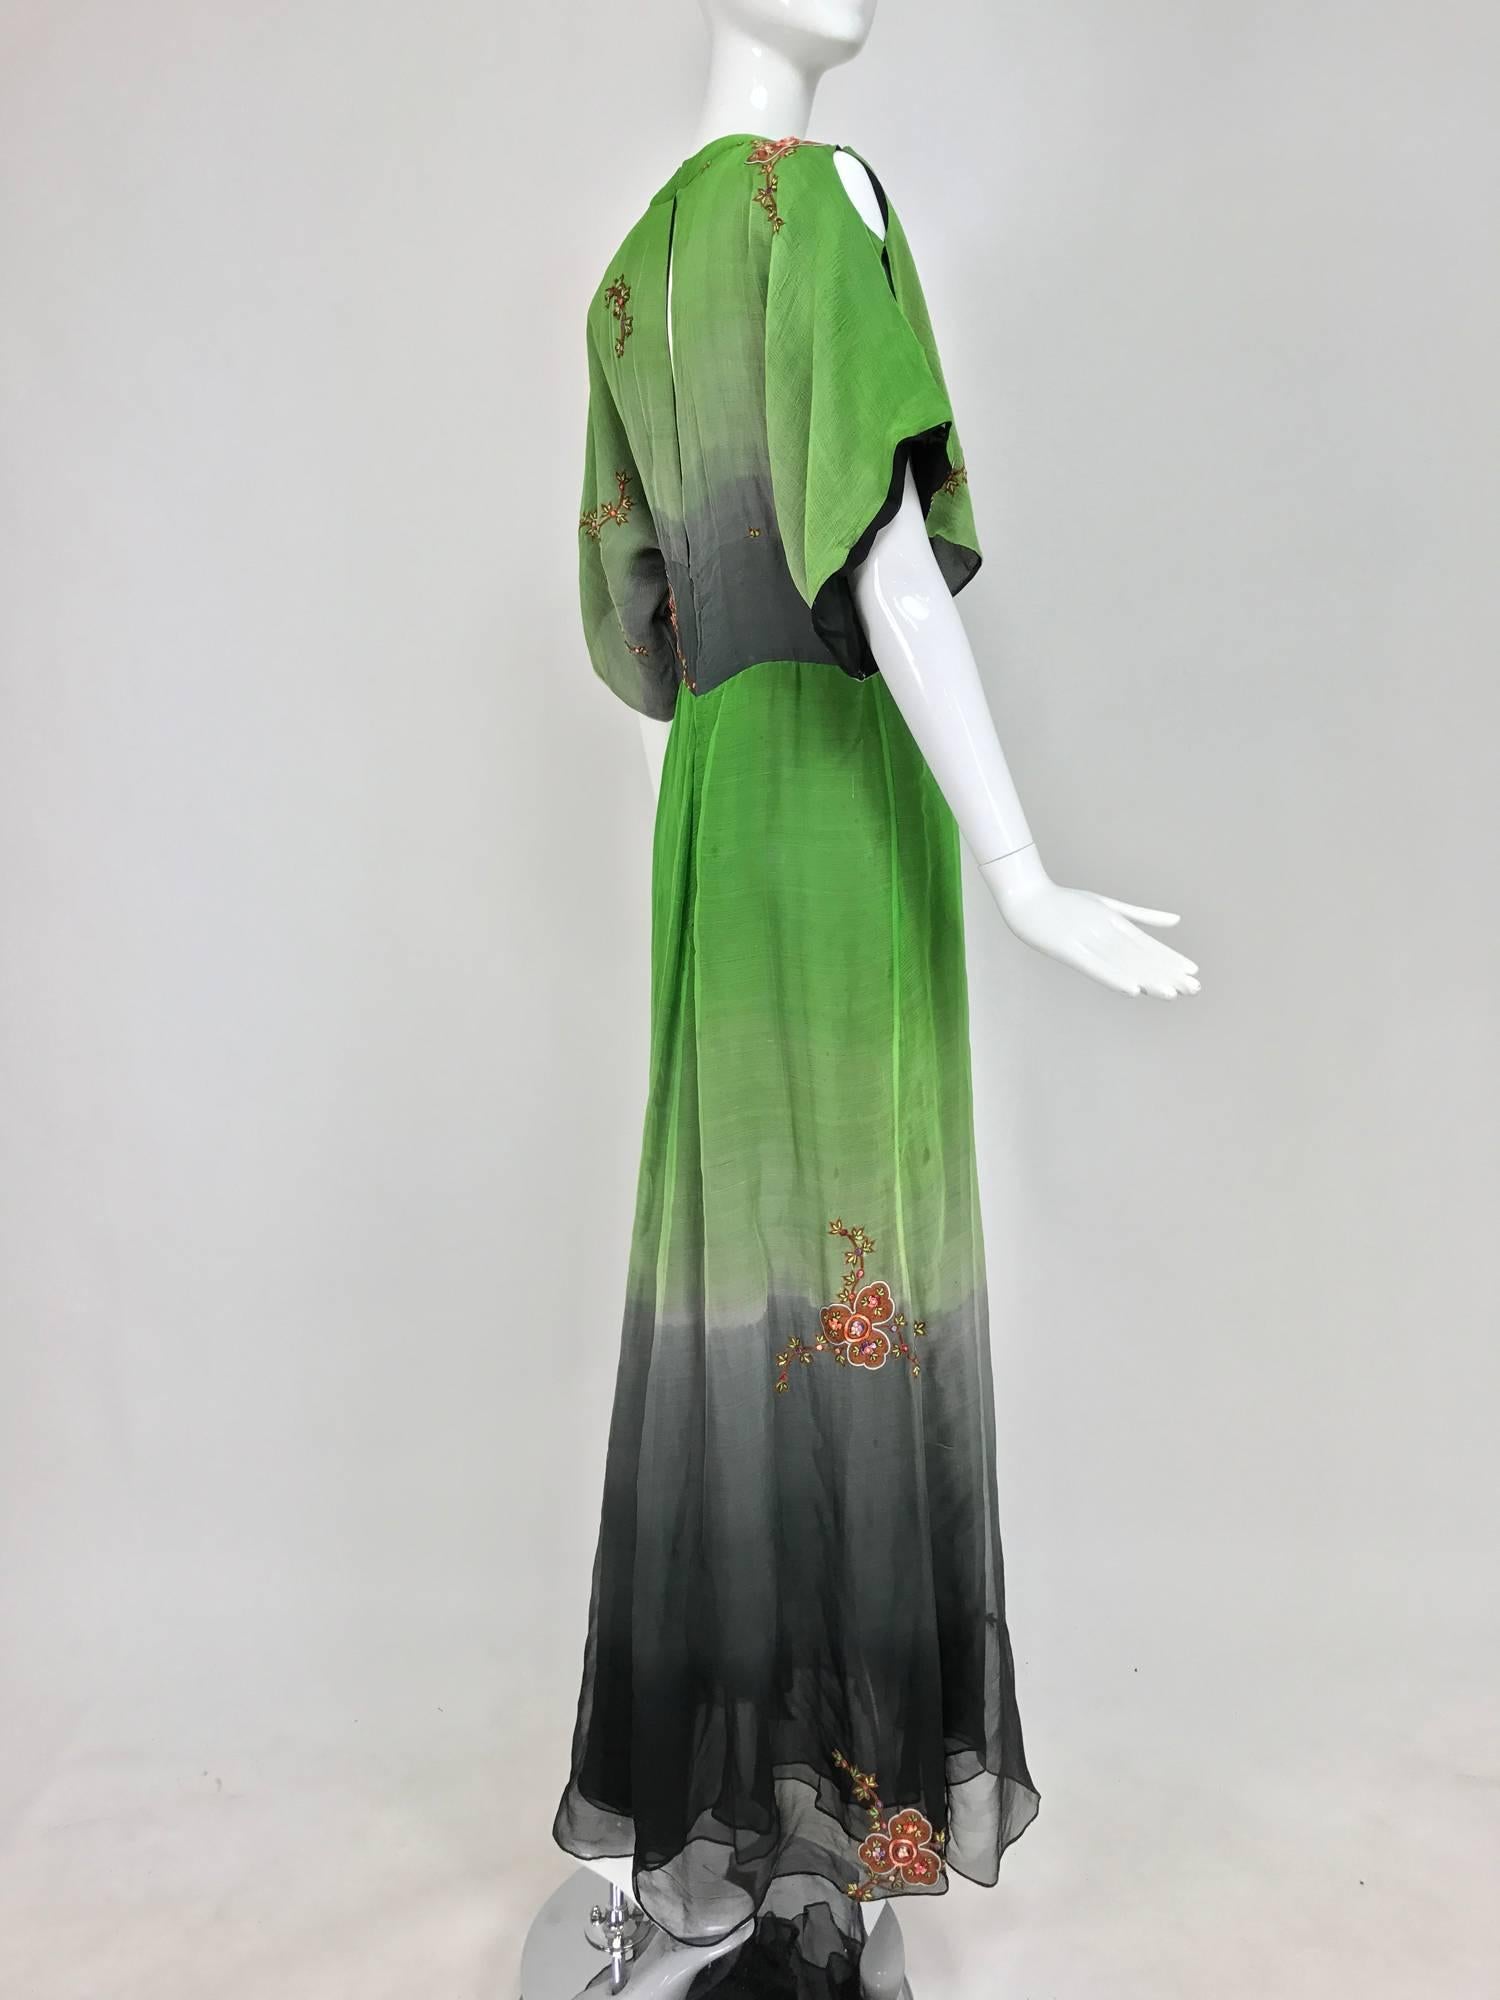 Thea Porter Couture ombred silk chiffon plunge gown with appliques 1970s 2